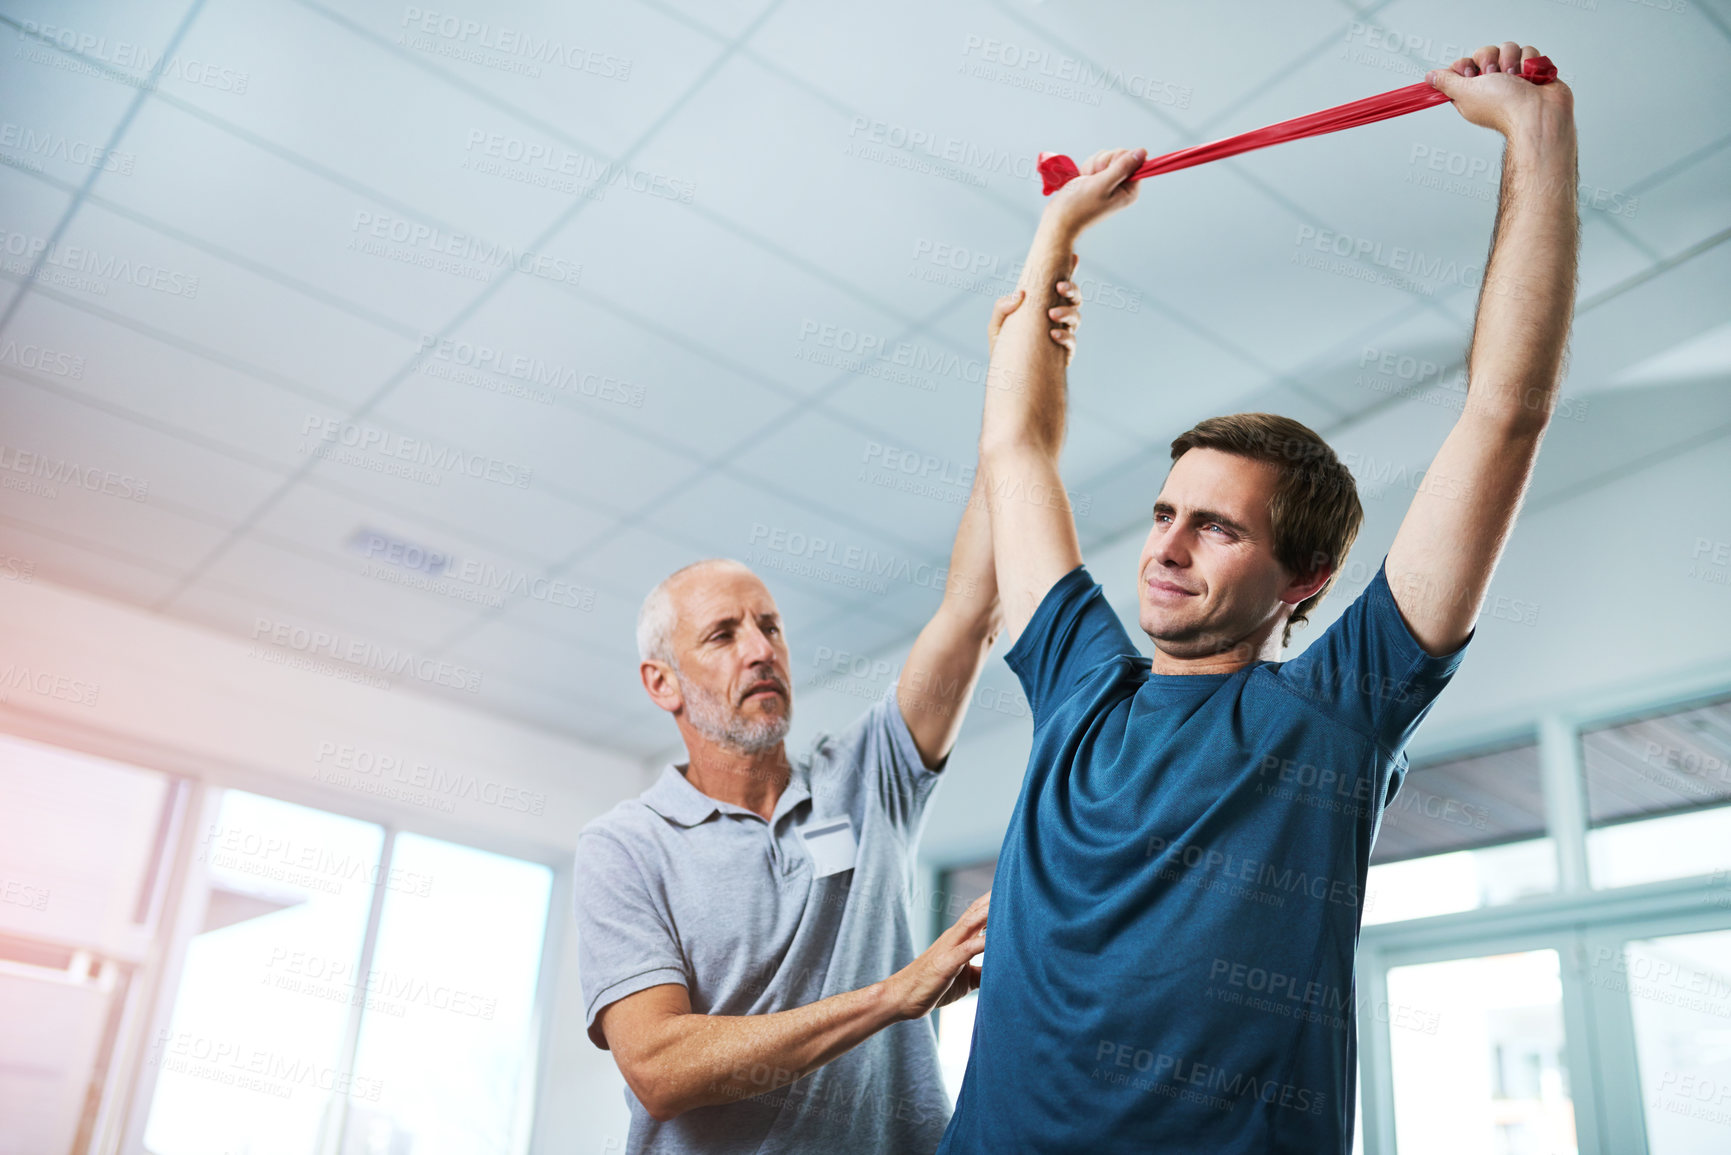 Buy stock photo Low angle shot of a handsome mature male physiotherapist helping a patient stretch with resistance bands